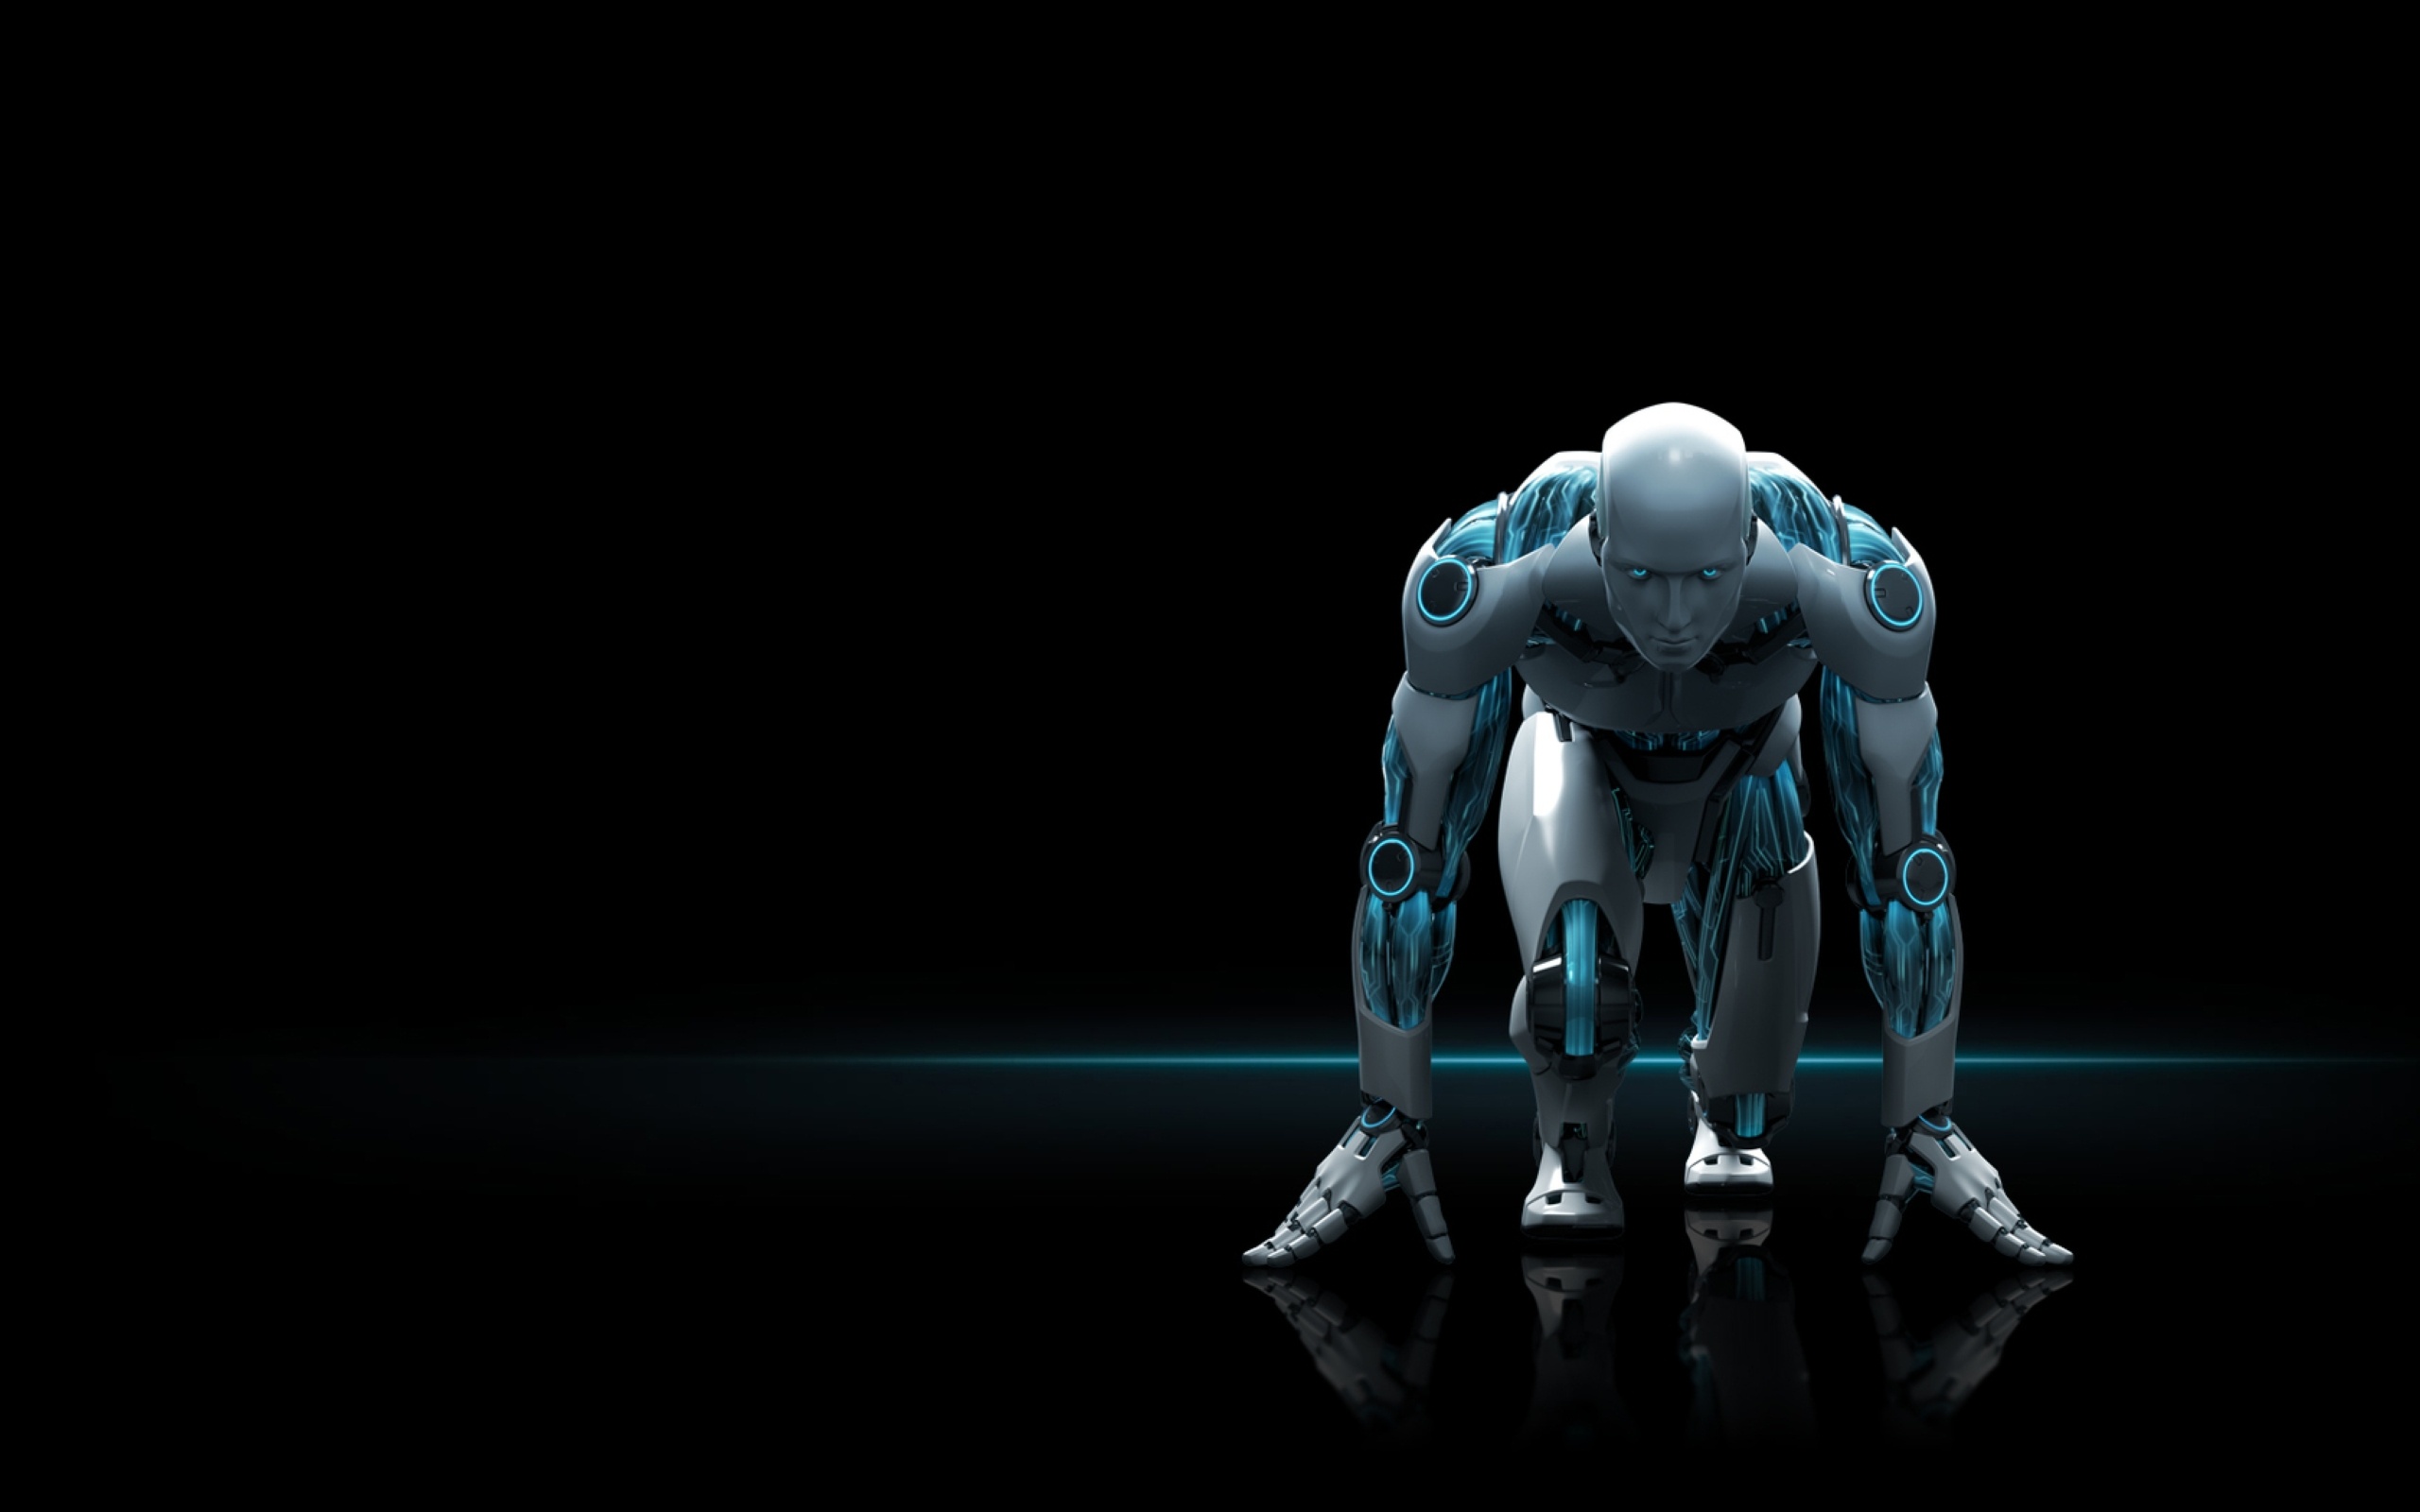 Robot Wallpaper Images amp Pictures   Becuo